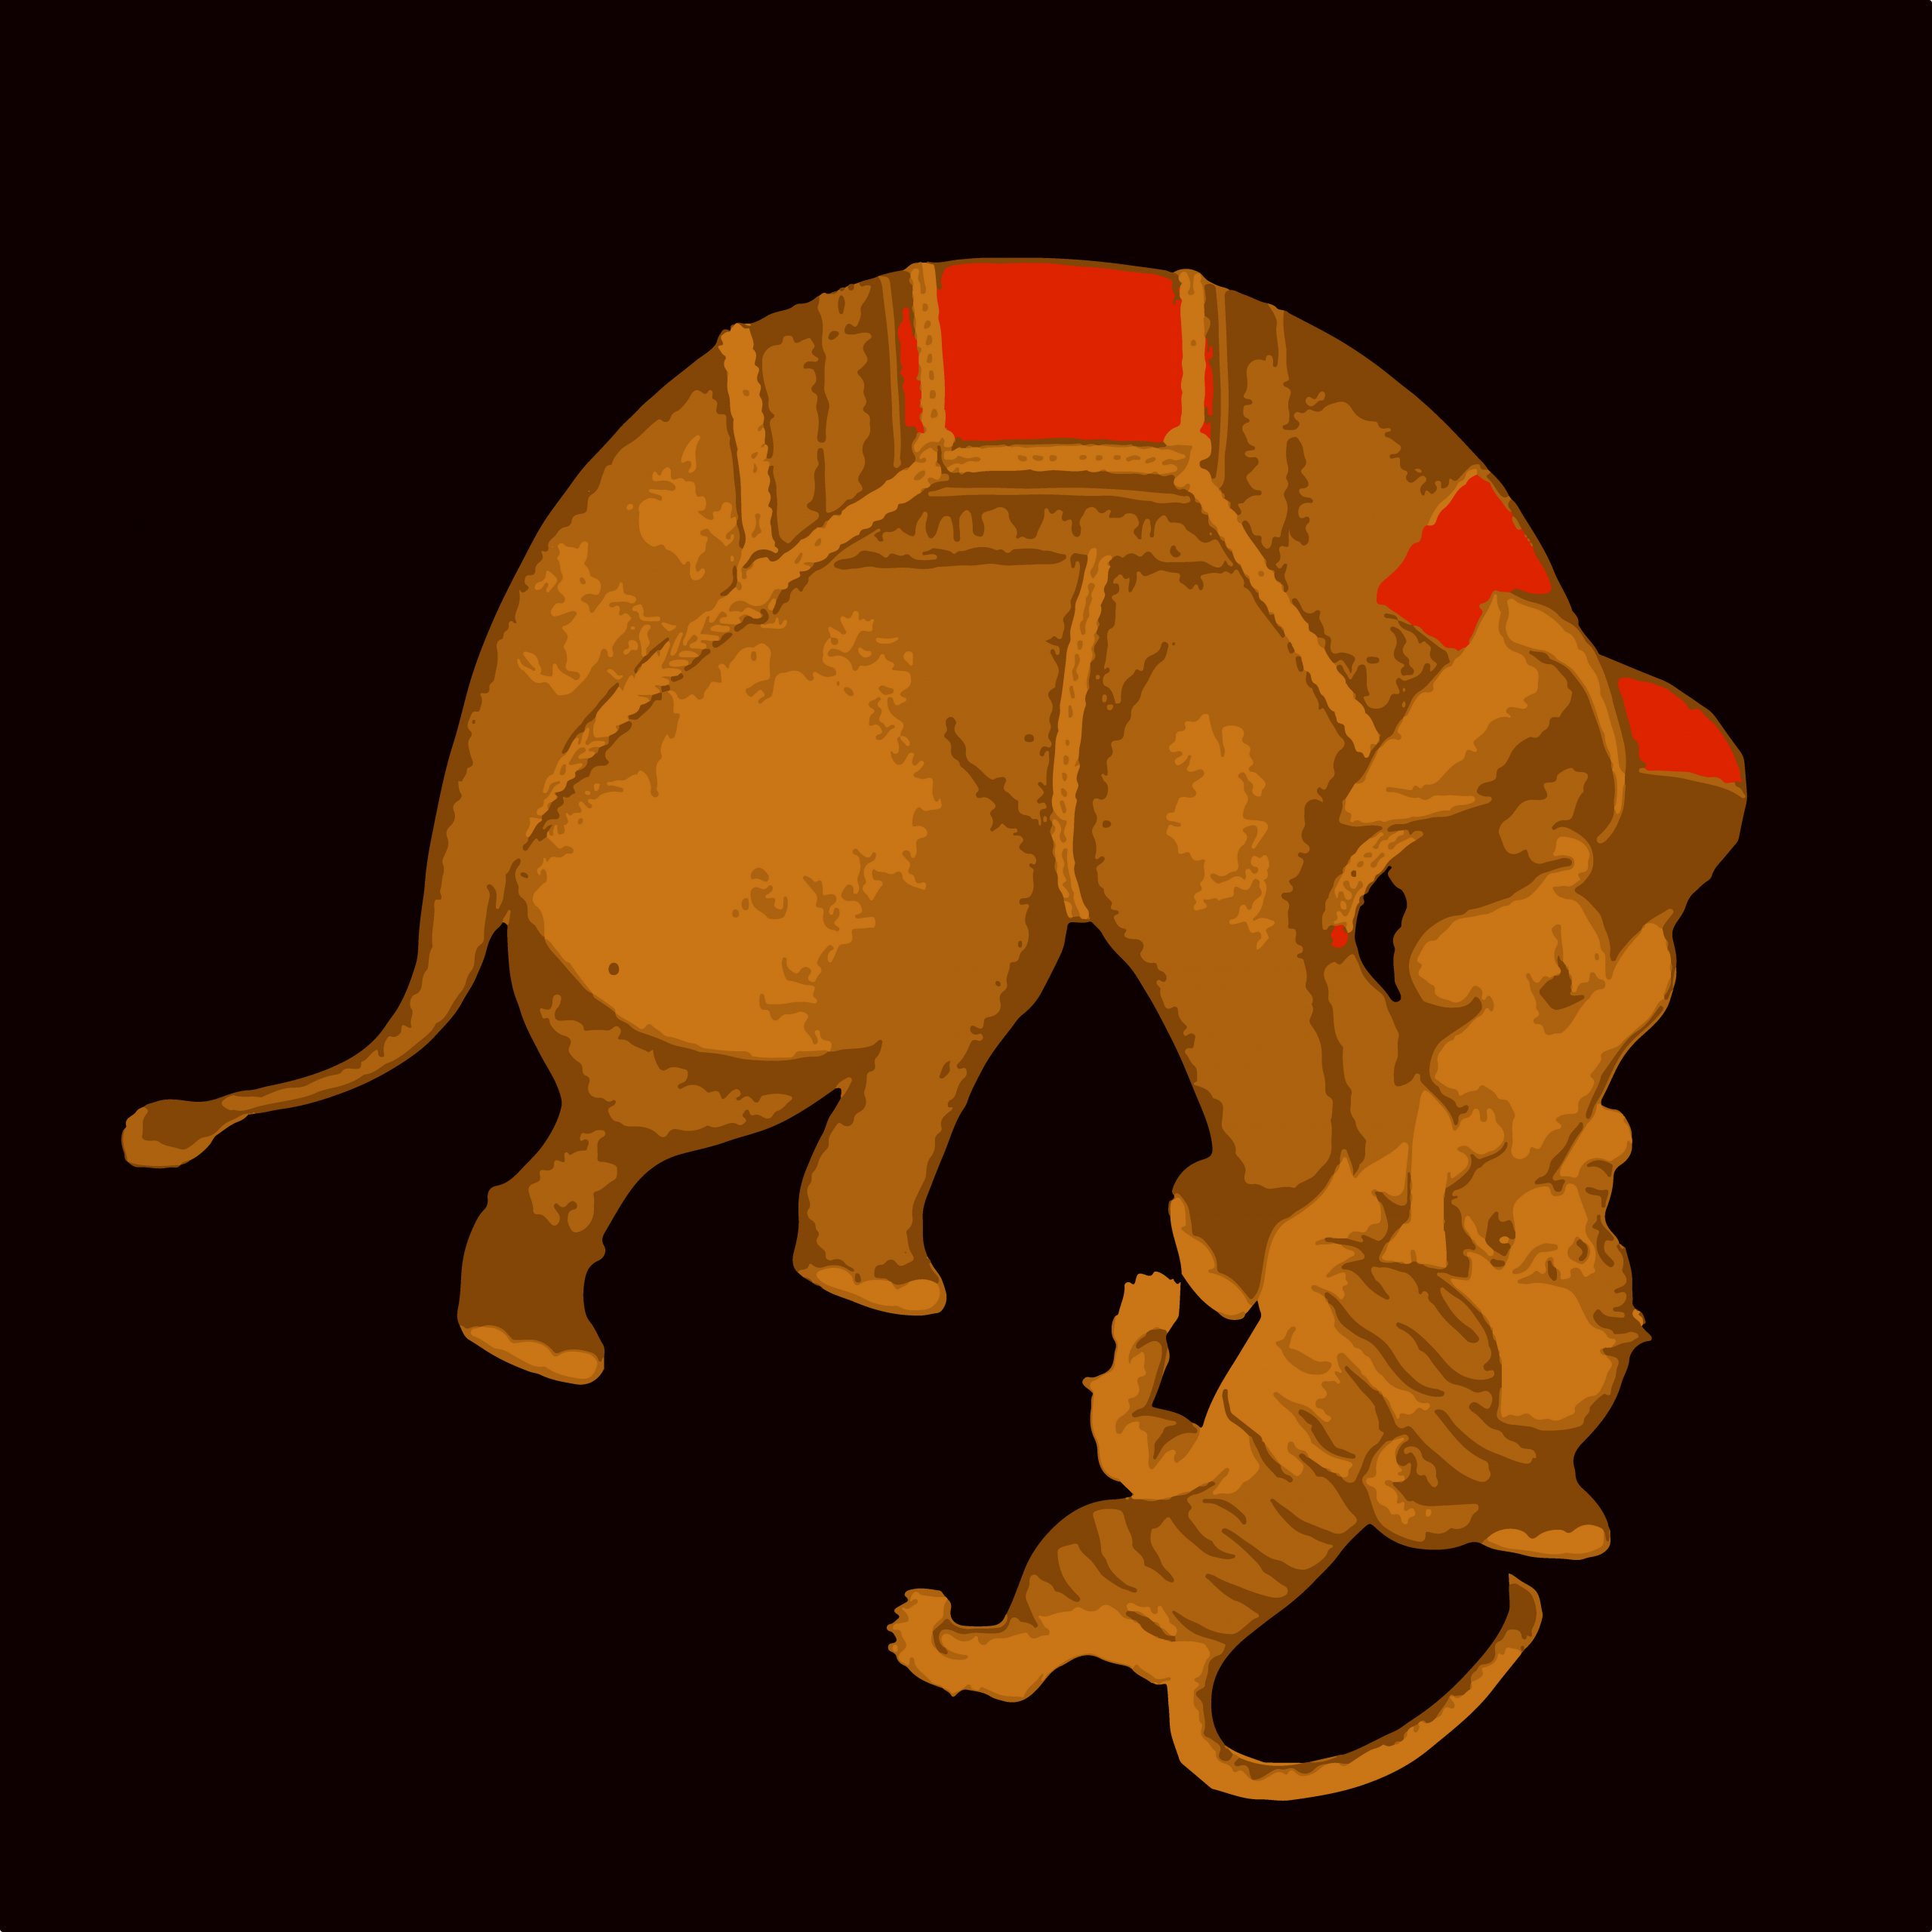 ILLUSTRATION of elephant and tiger